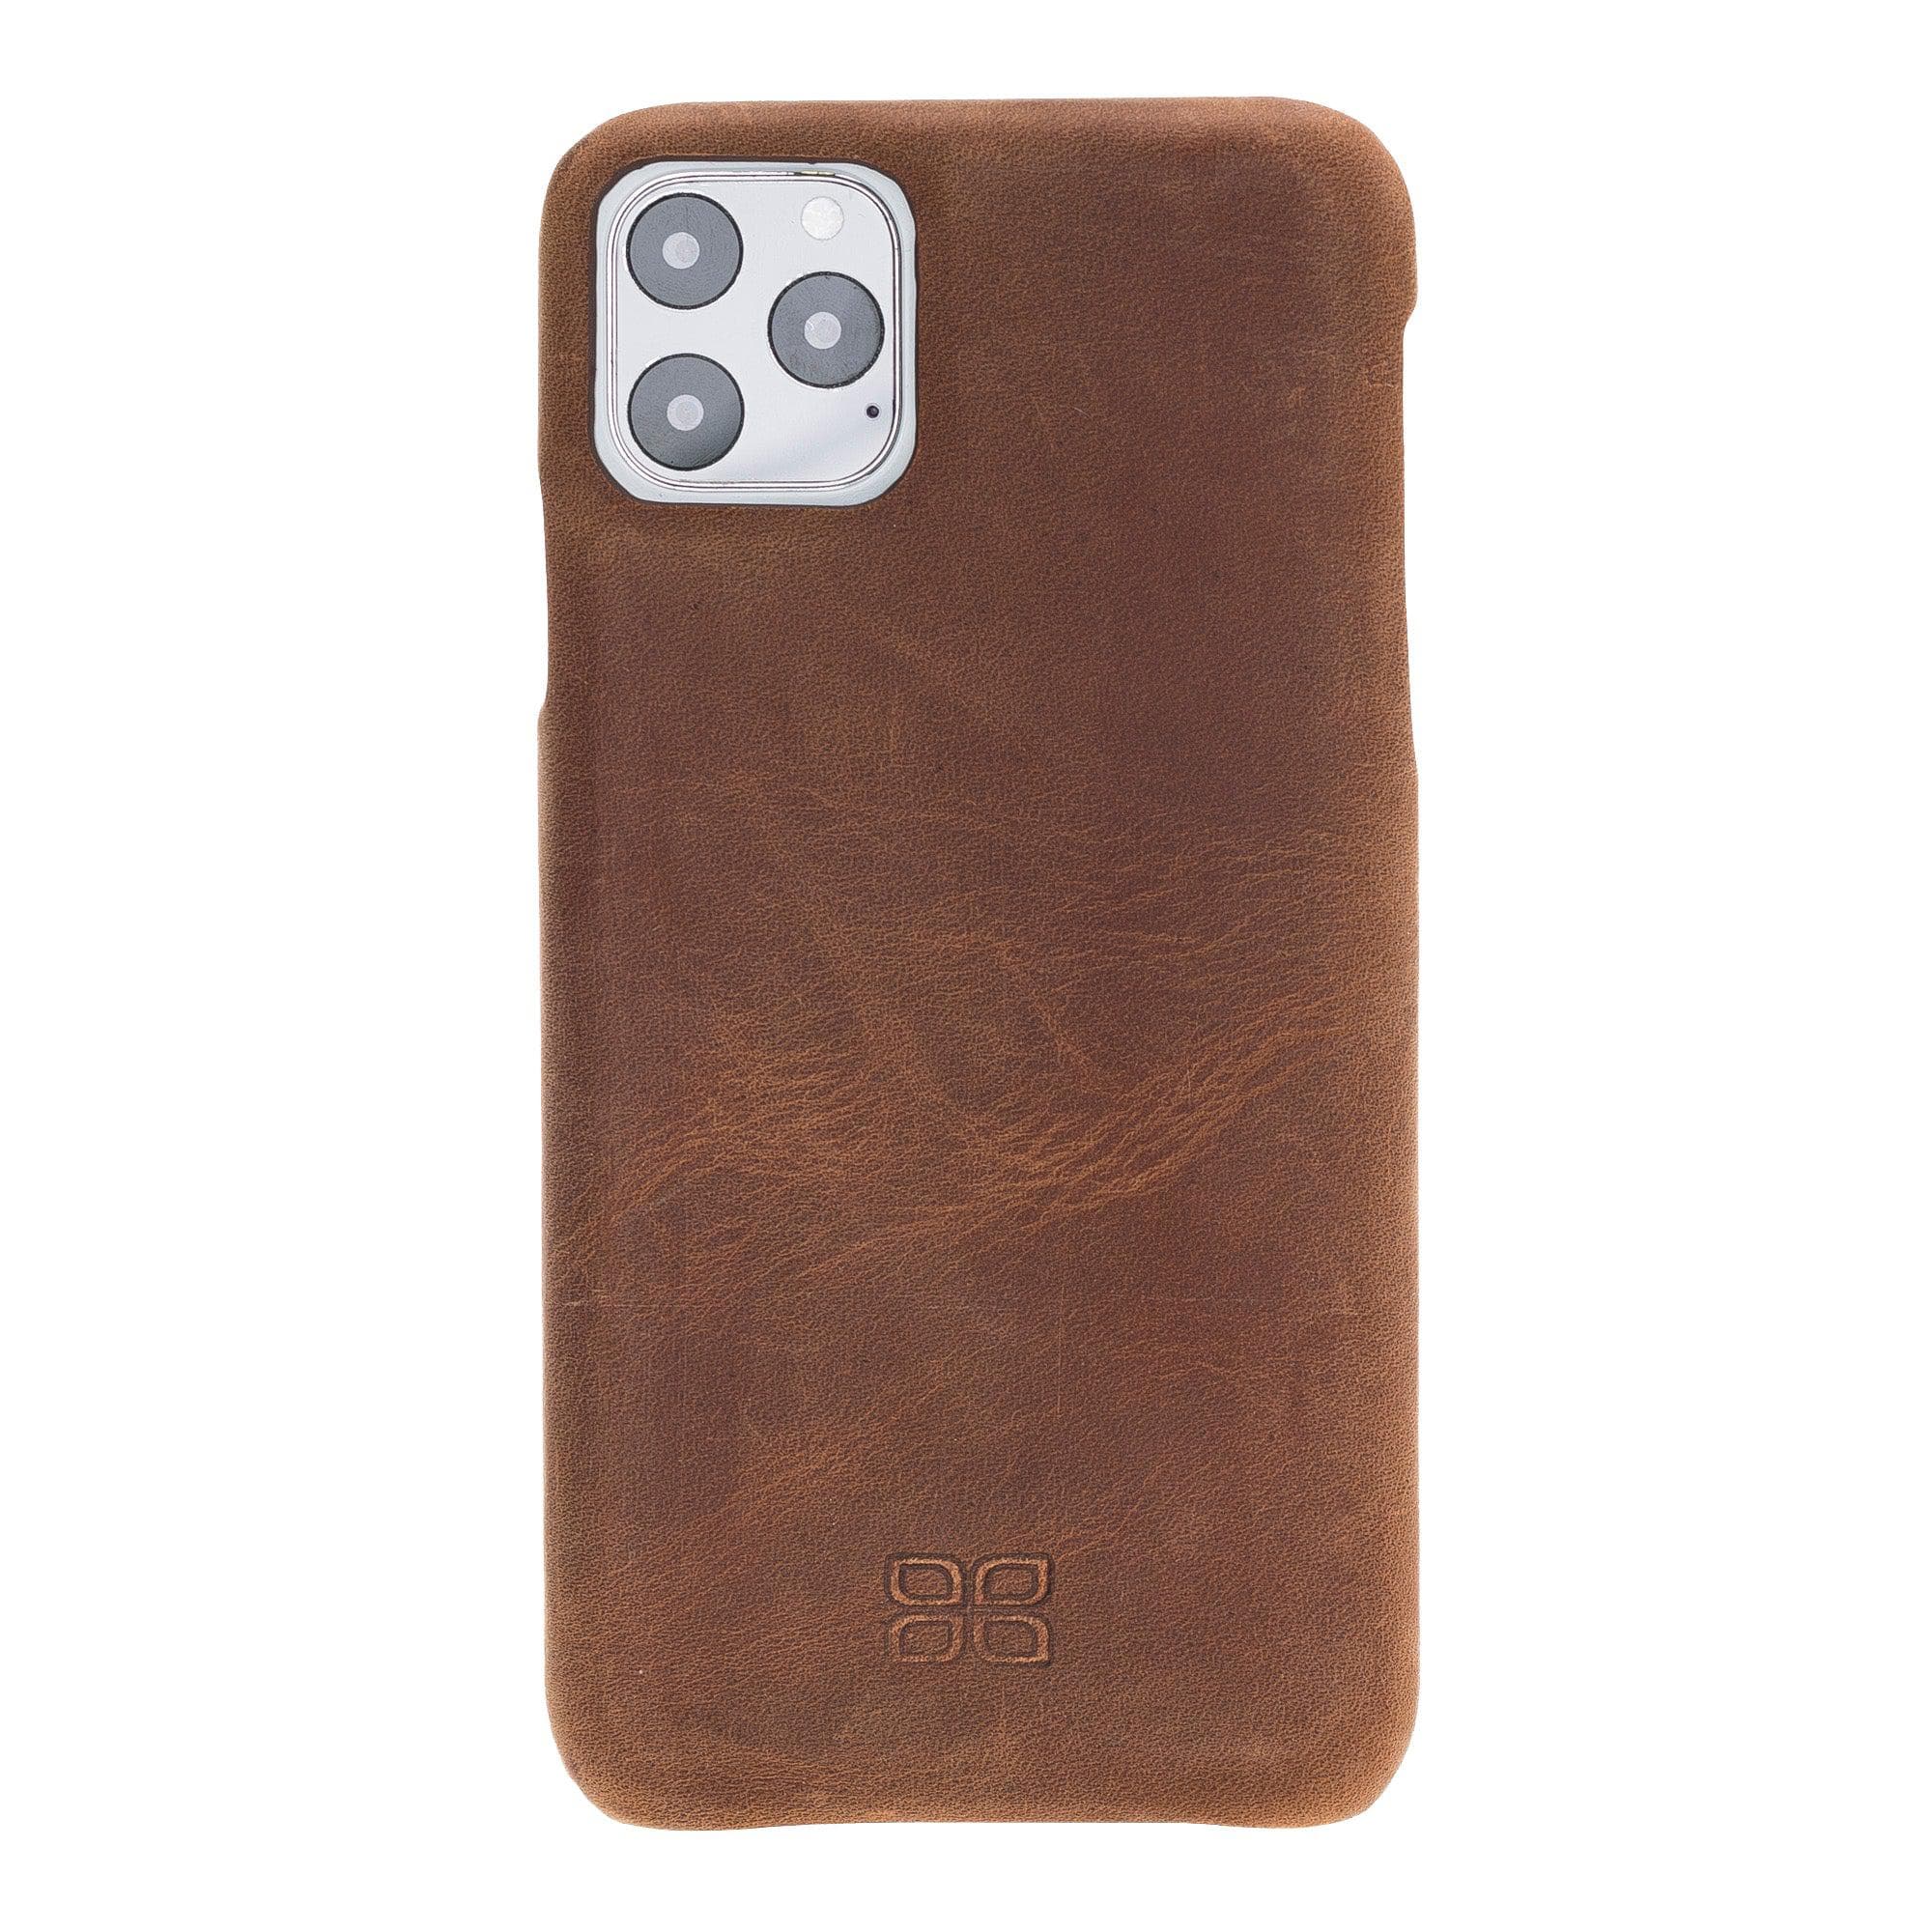 Bouletta Fully Leather Back Cover for Apple iPhone 11 Series İPhone 11 Pro Max / Antic Brown Bouletta LTD